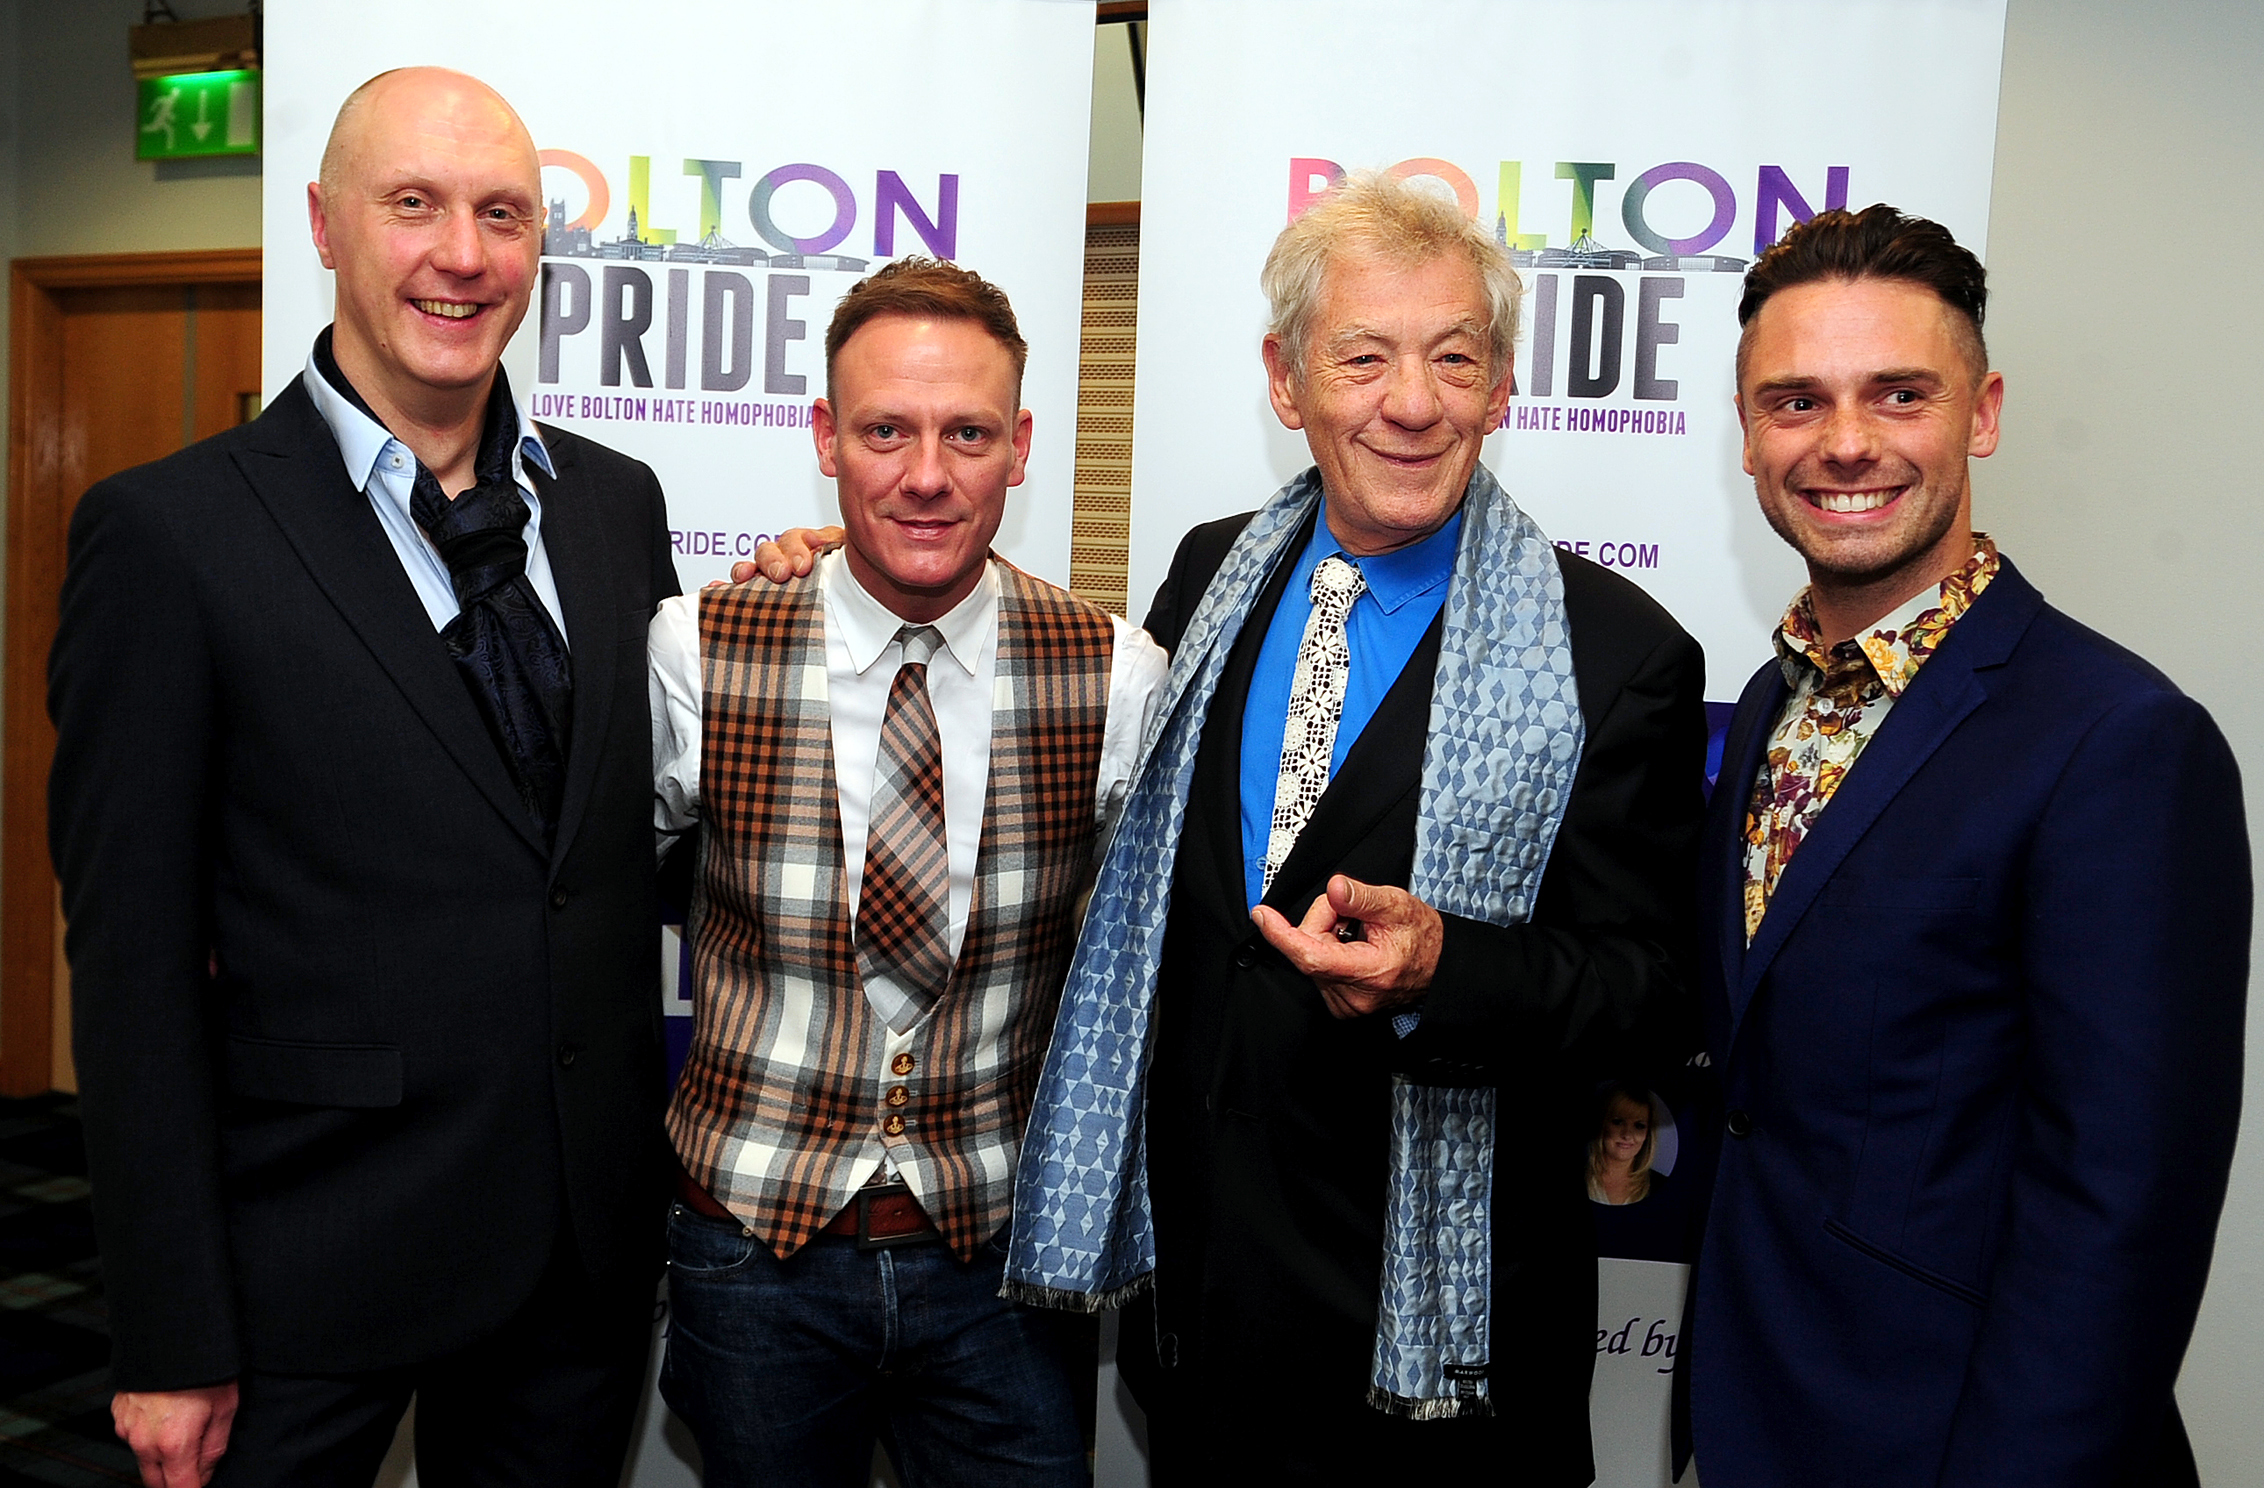 From left are Mark Geary, Polton Pride Director, Anthony Cotton, Sir Ian McKellen and James Edgington..Bolton Pride launch night Gala Dinner held at The Macron Stadium. Photo by Nigel Taggart, Newsquest Ltd, Friday October 16, 2015.